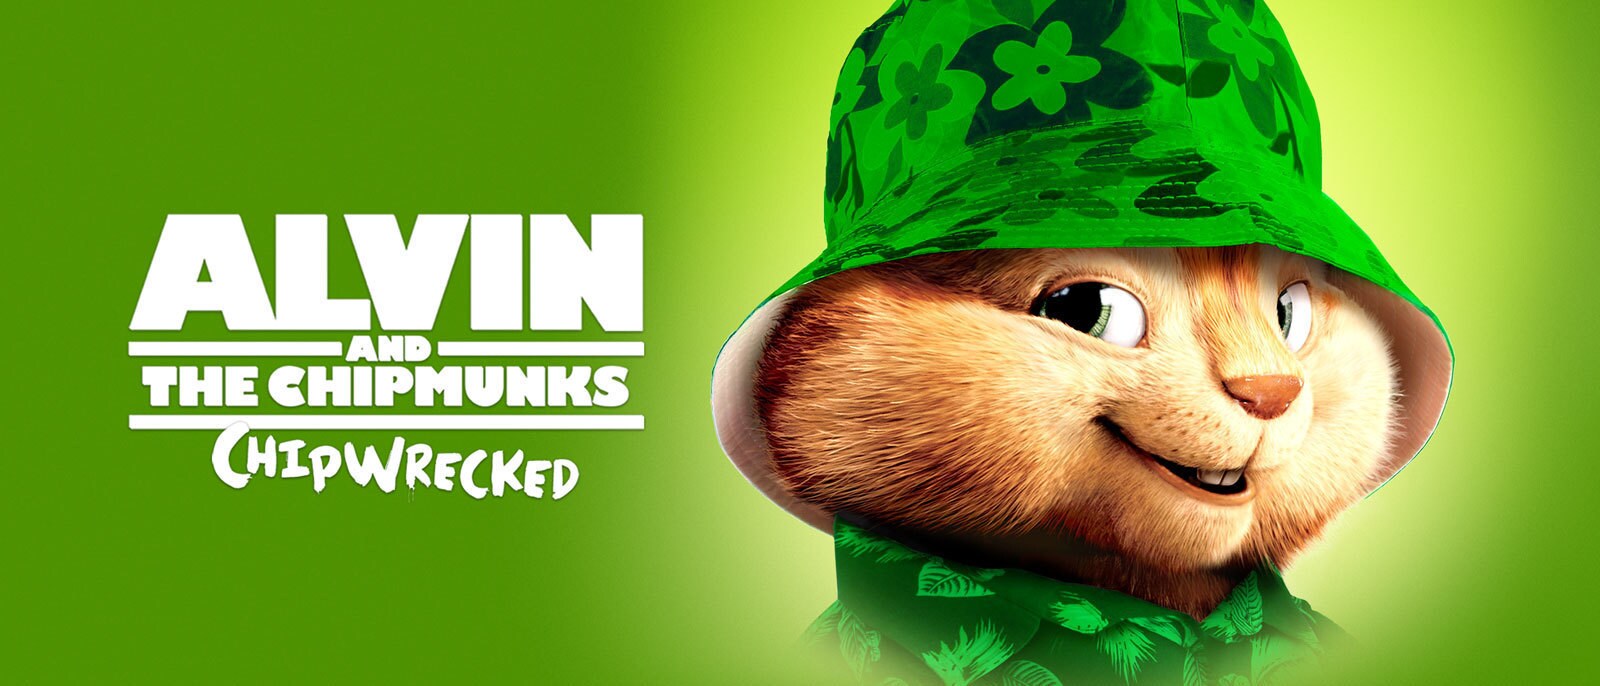 Alvin and the Chipmunks: Chipwrecked Hero